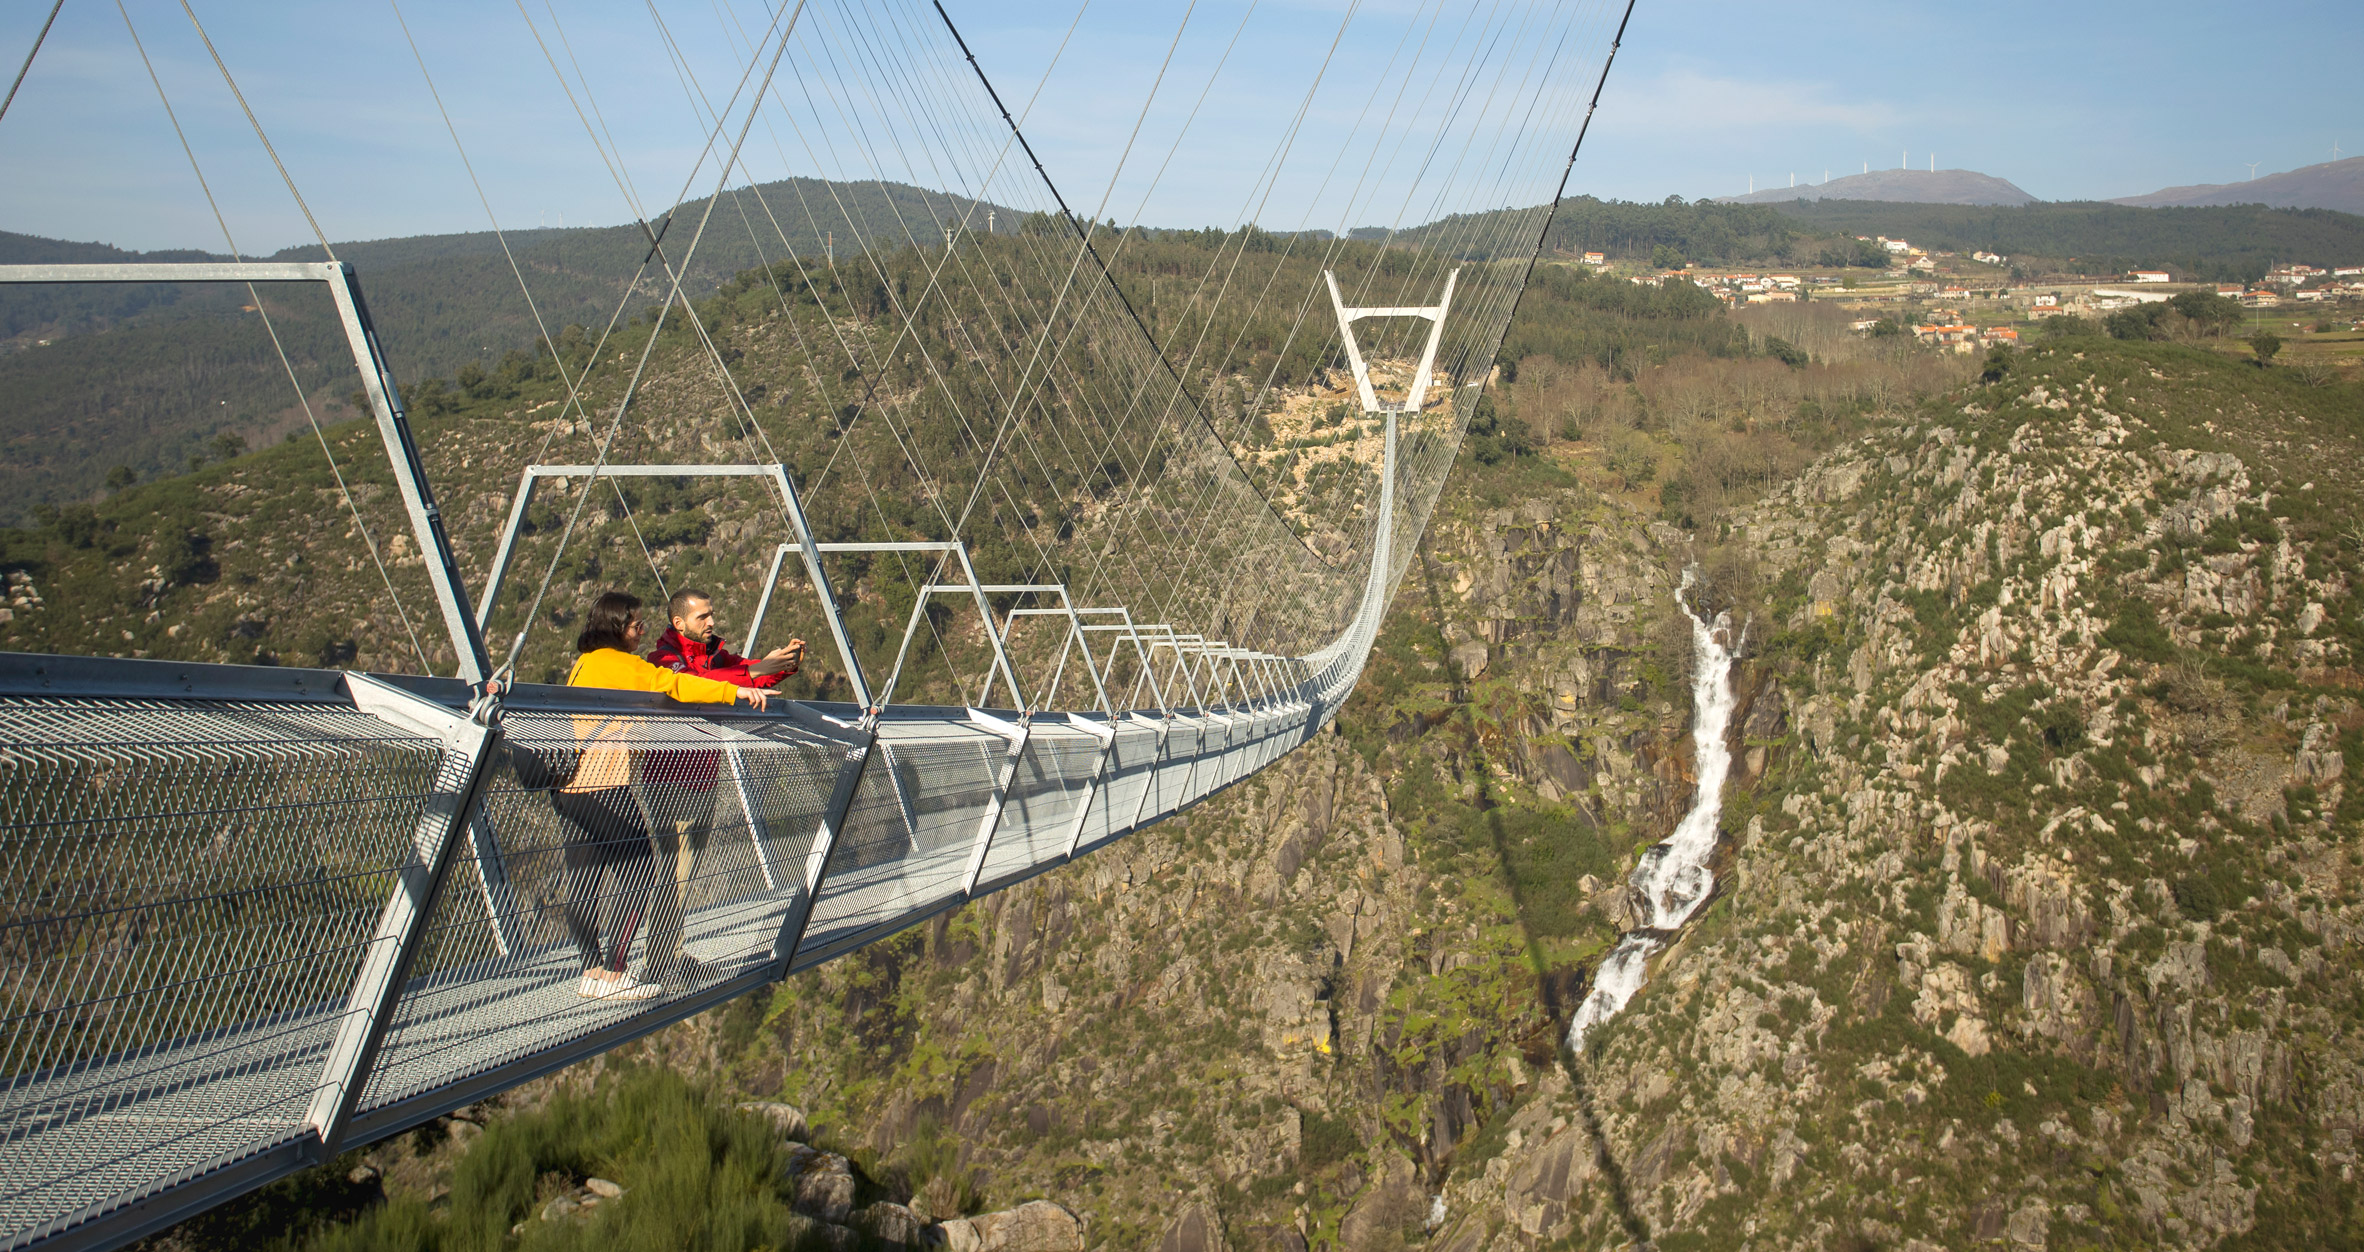 The 516 Arouca bridge is supported by tensile cables